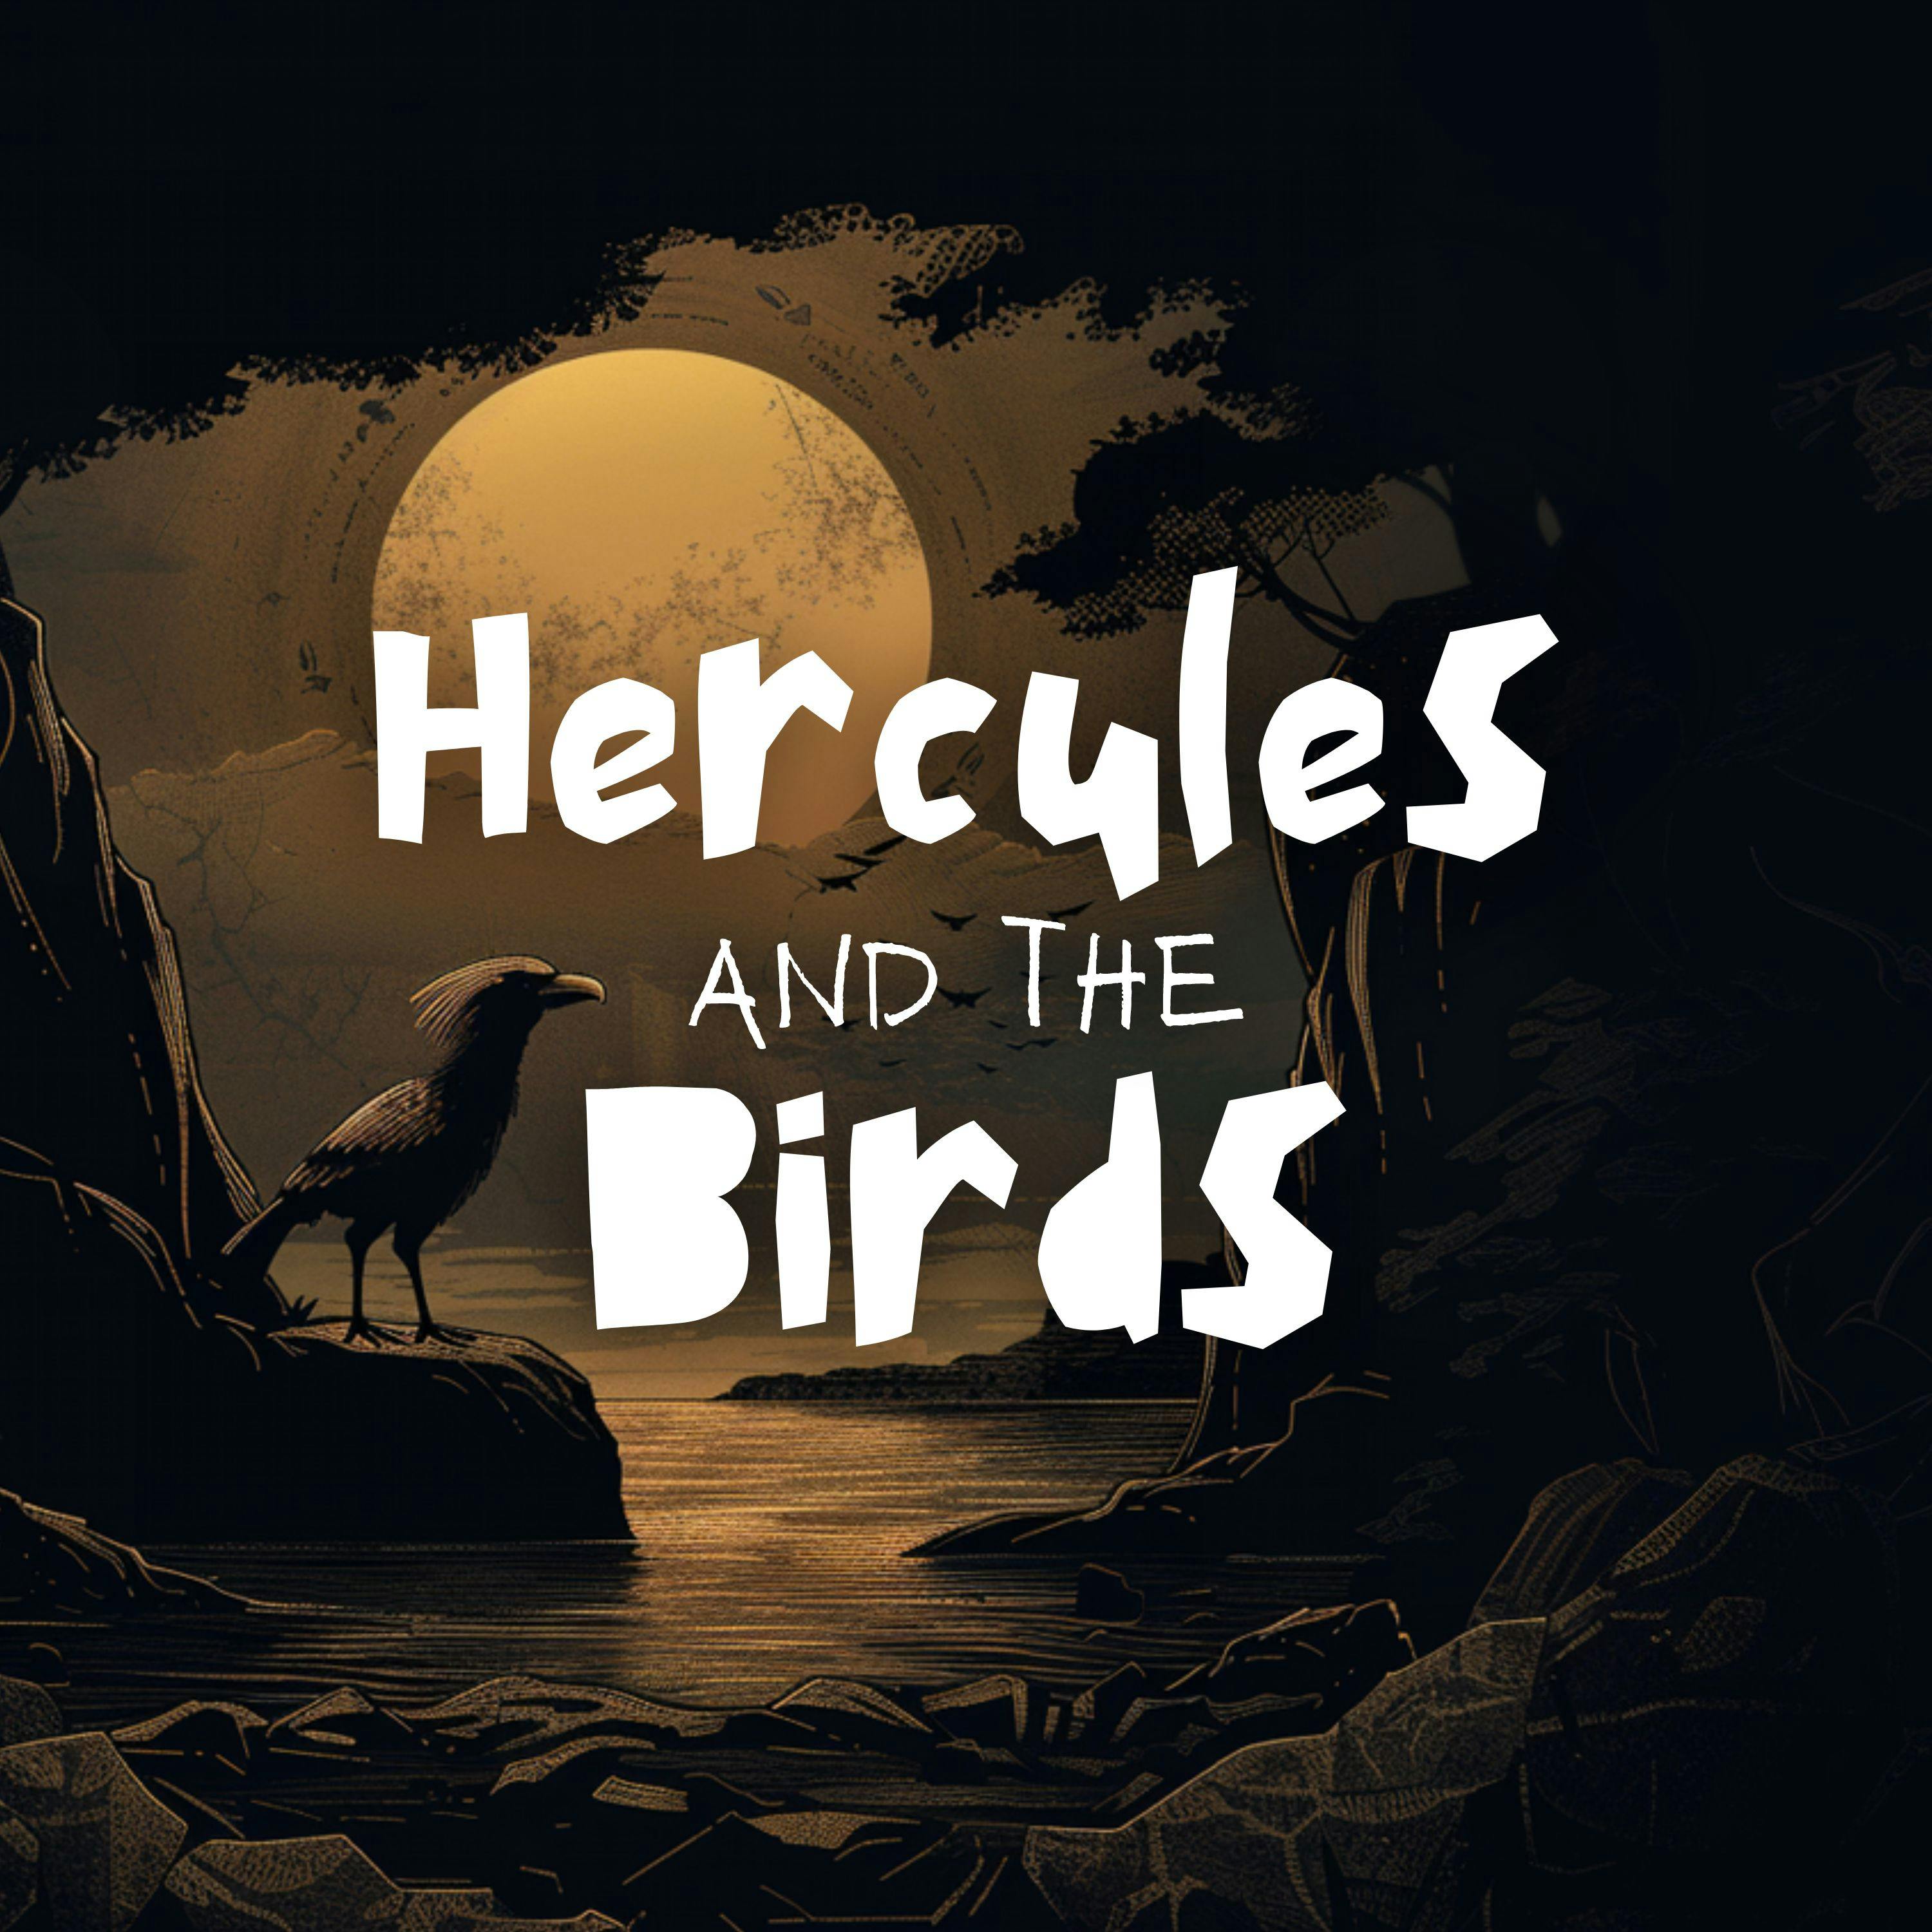 Hercules and the Birds